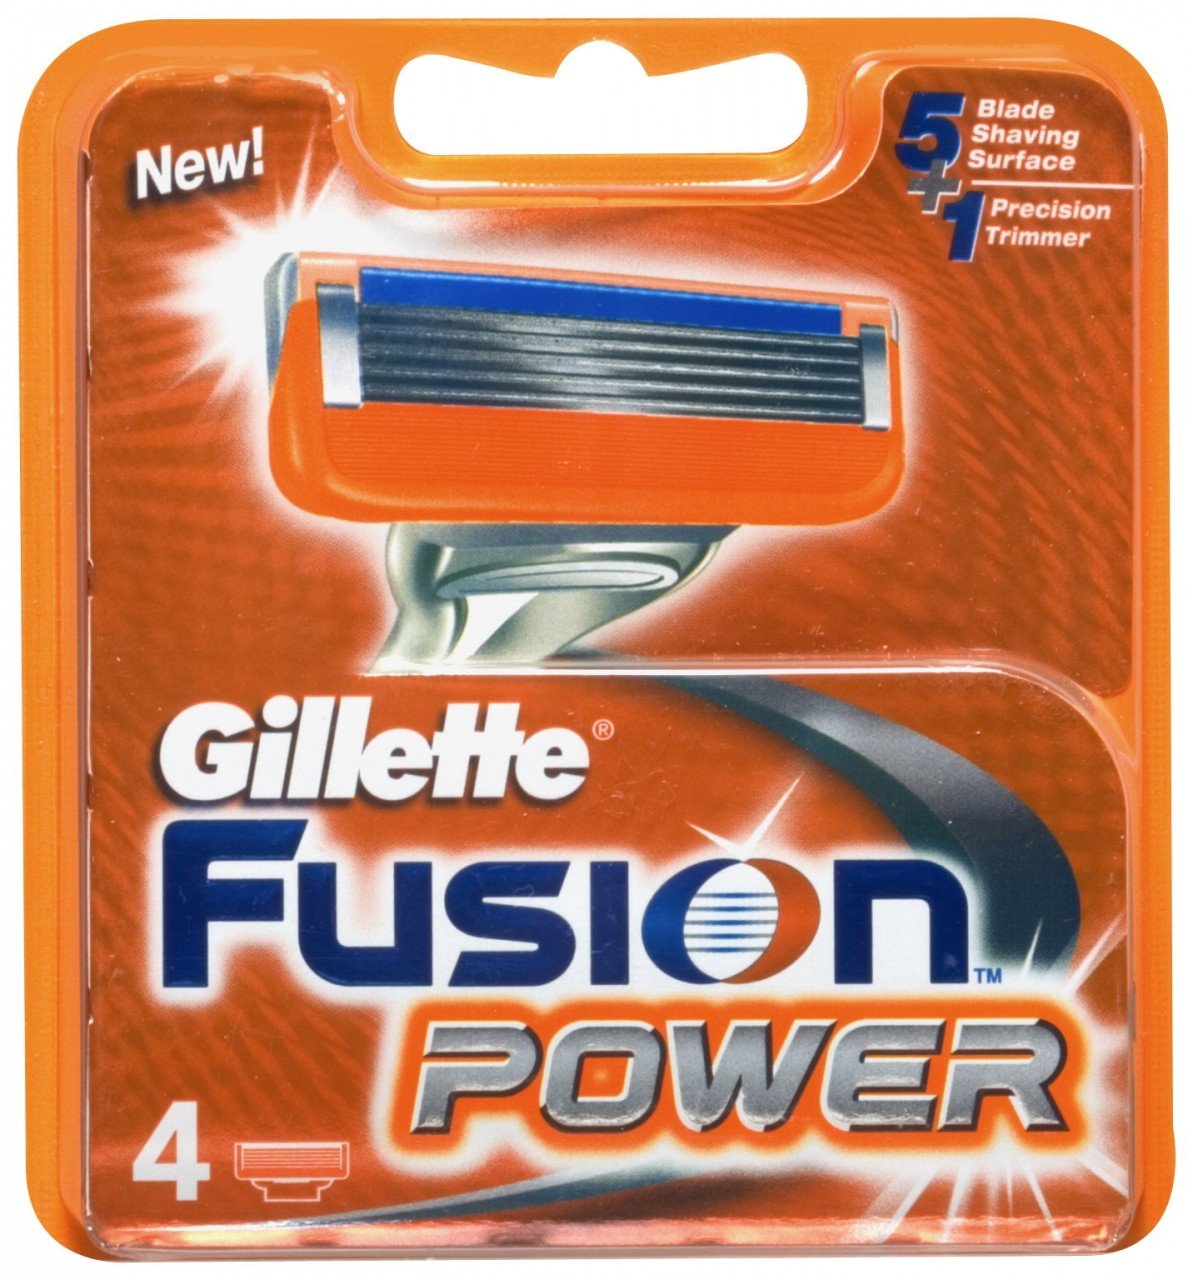 Gillette - Fusion Power Blades 4 Pack